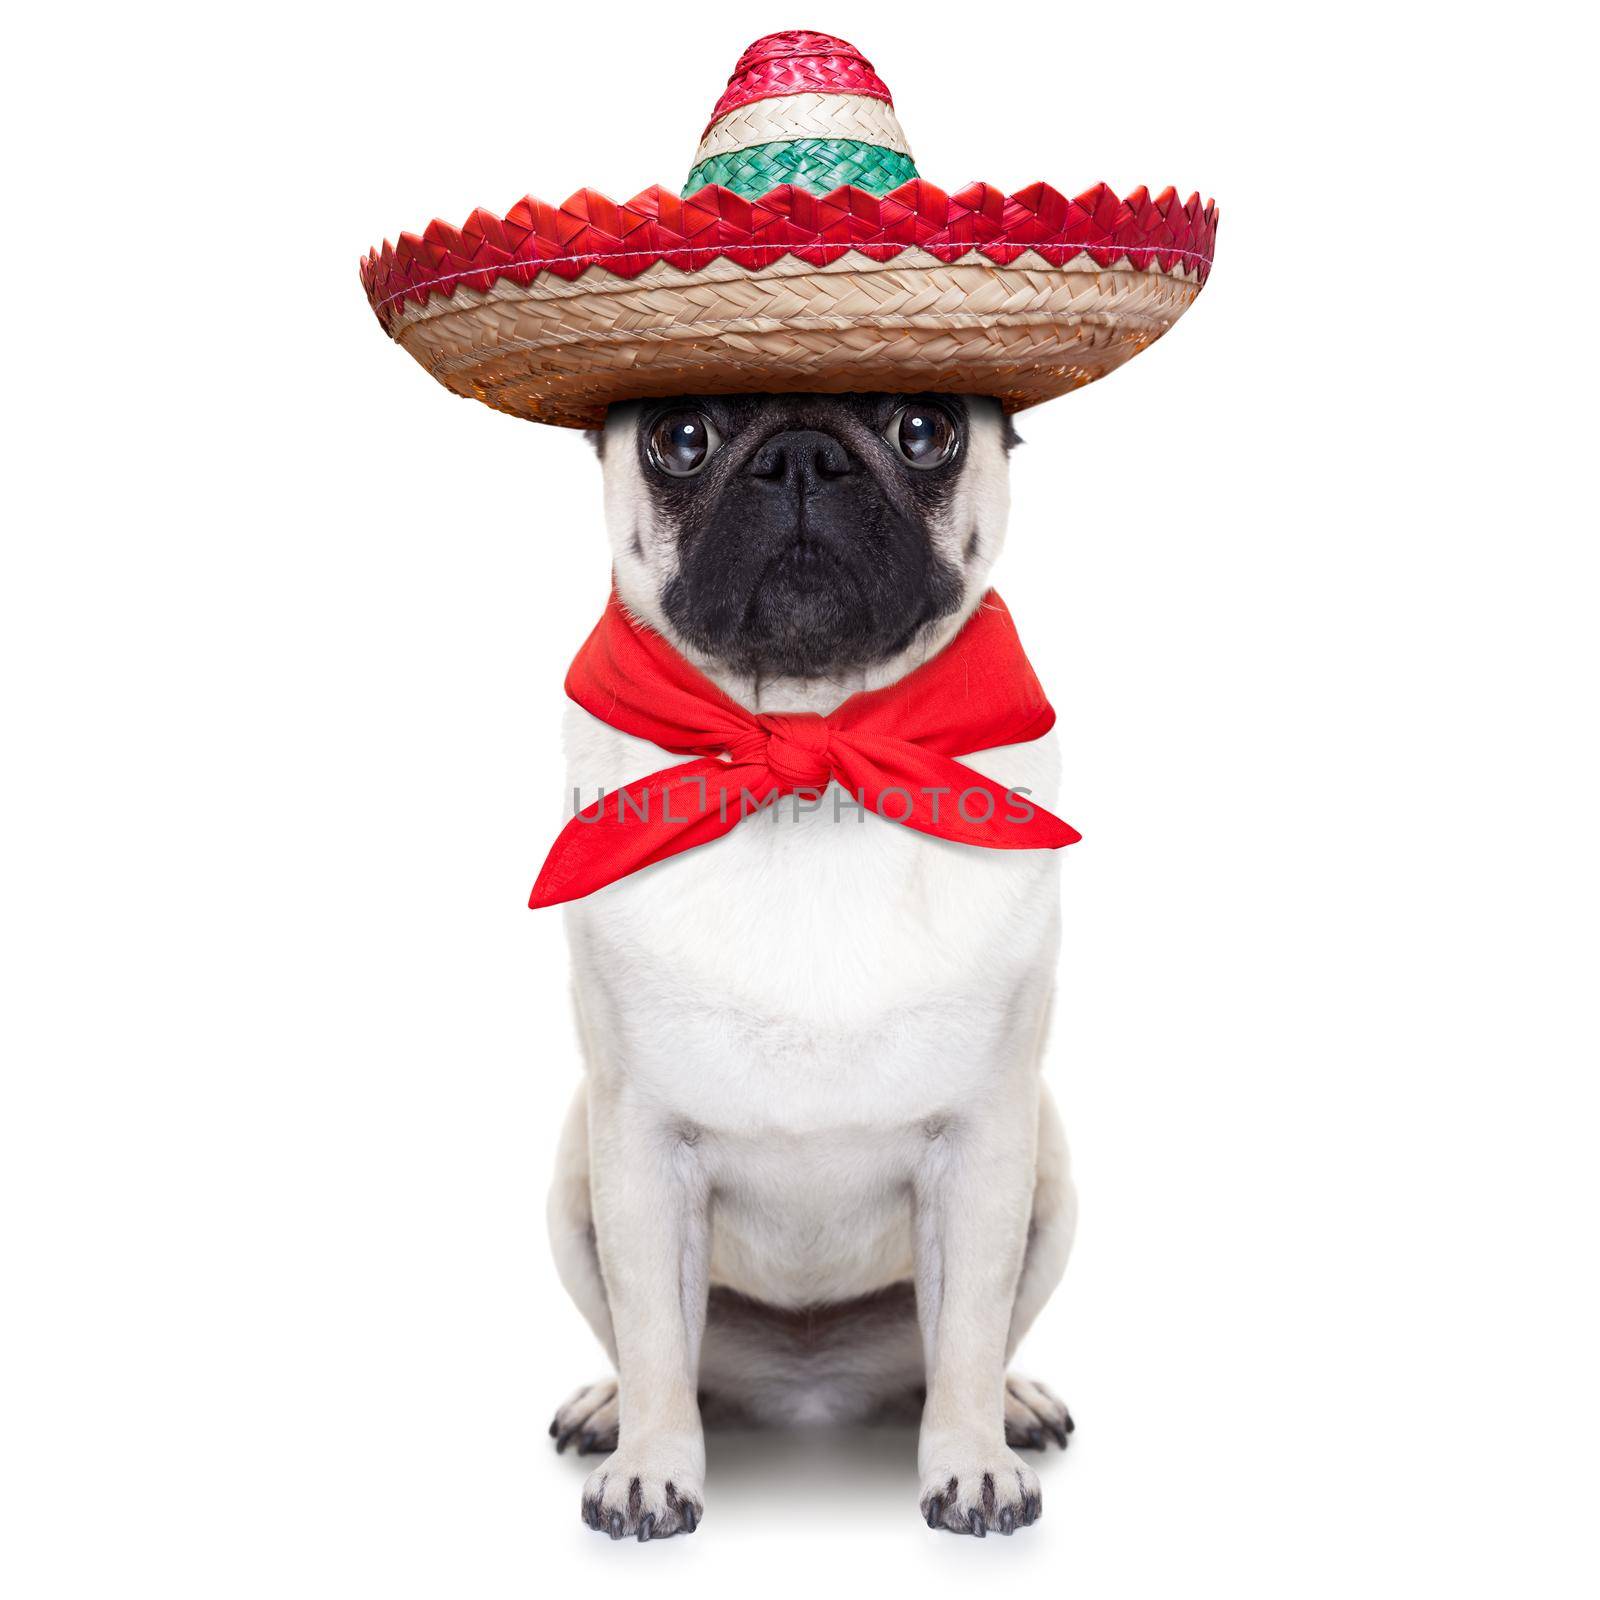 mexican dog with big sombrero hat and red tie